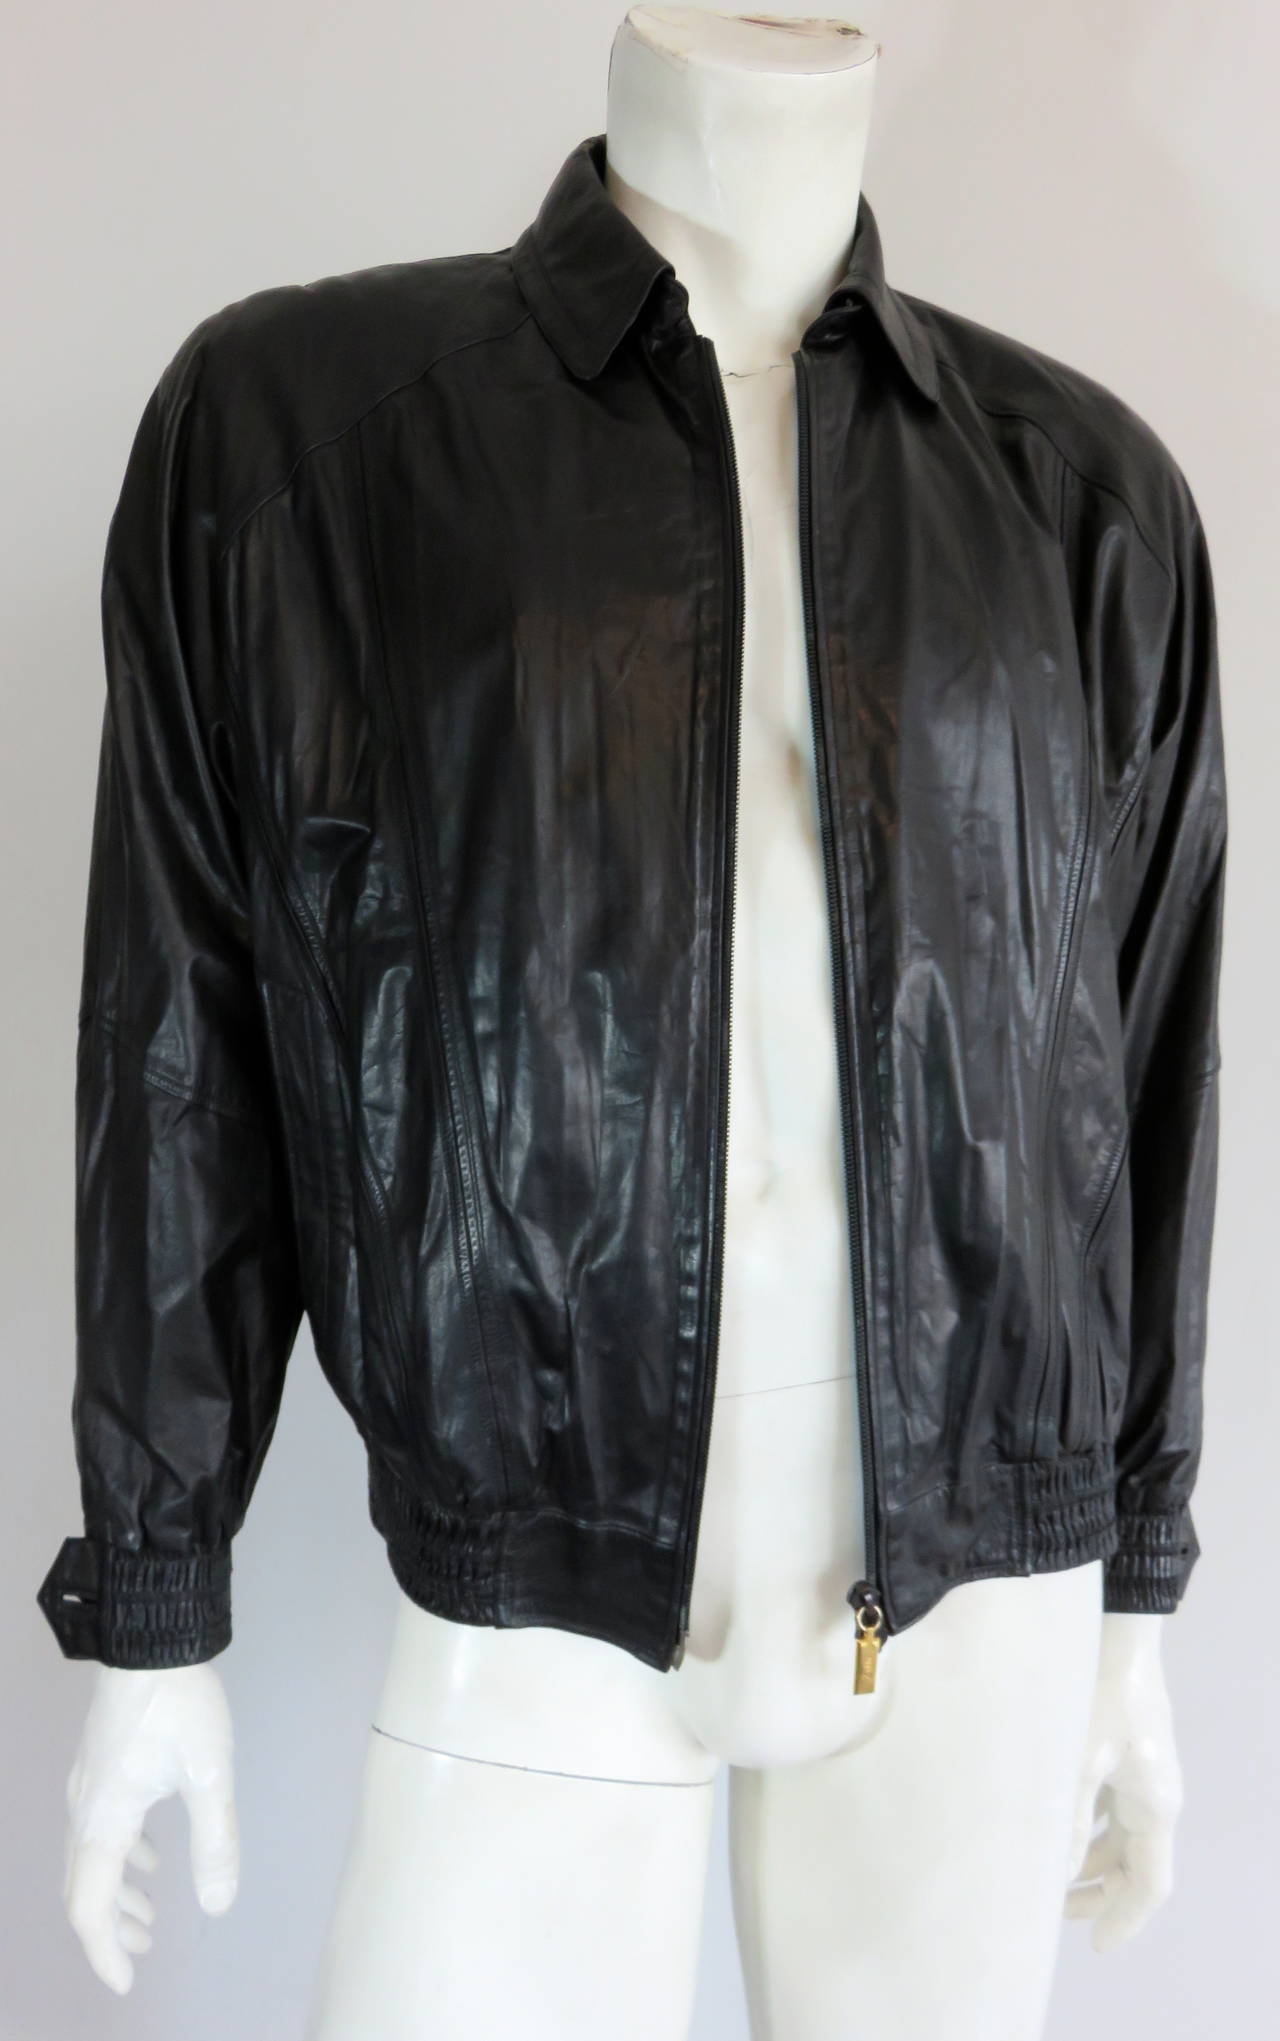 1980's ZILLI FRANCE Men's 'Chablis' model, calf leather jacket with printed silk lining.

The inside lining features a novelty, black and white, twill check print with twin, golden crests at the top and animal carved, walking sticks at the sides